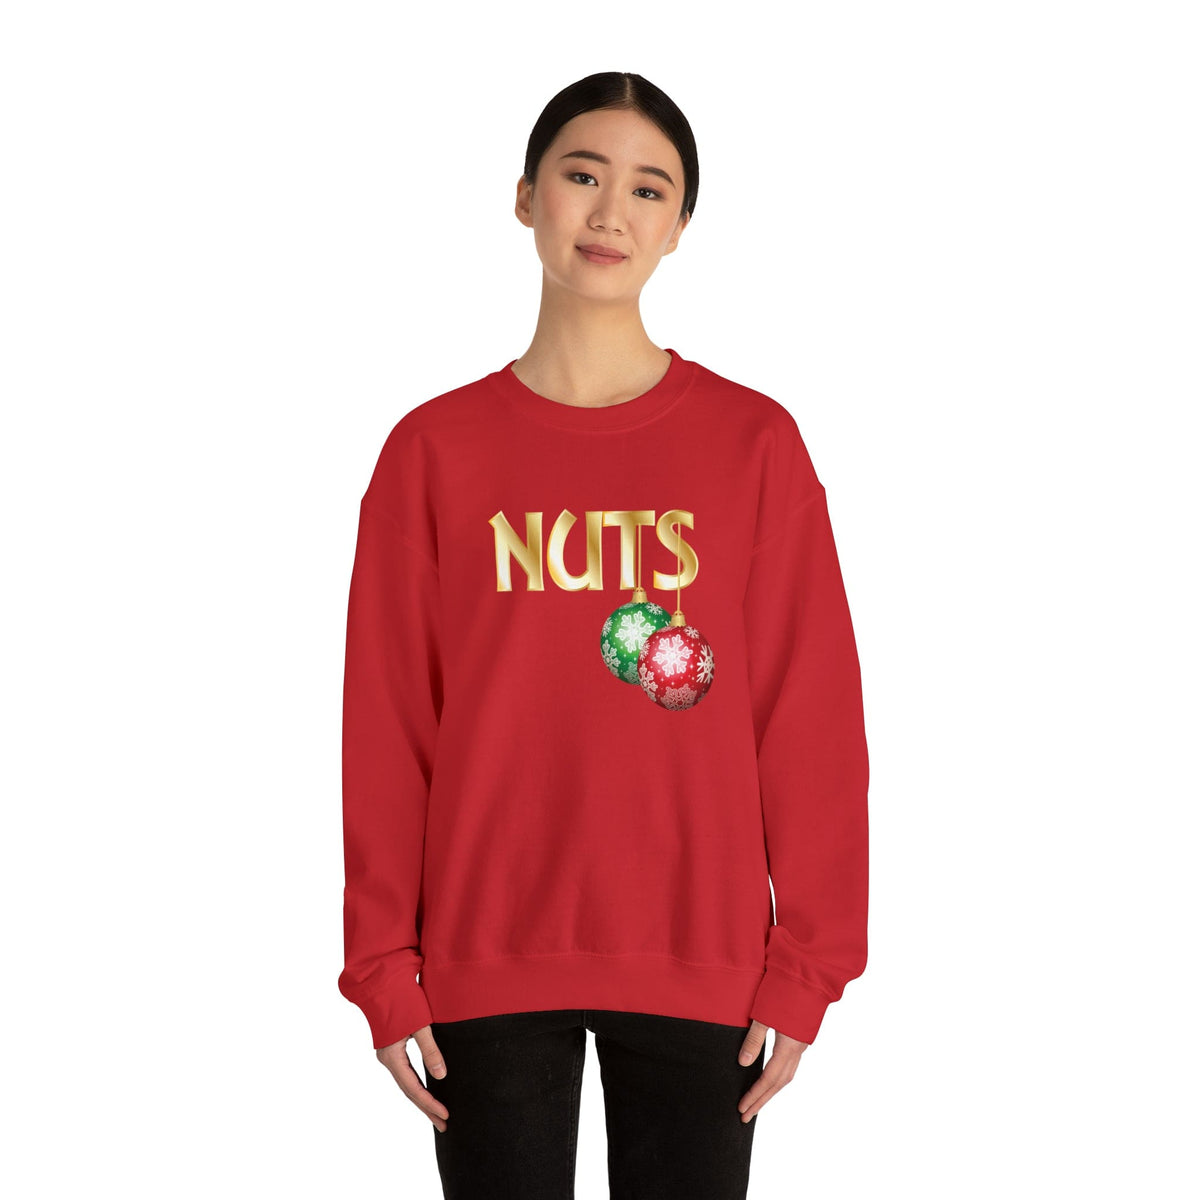 Nuts Christmas Sweater